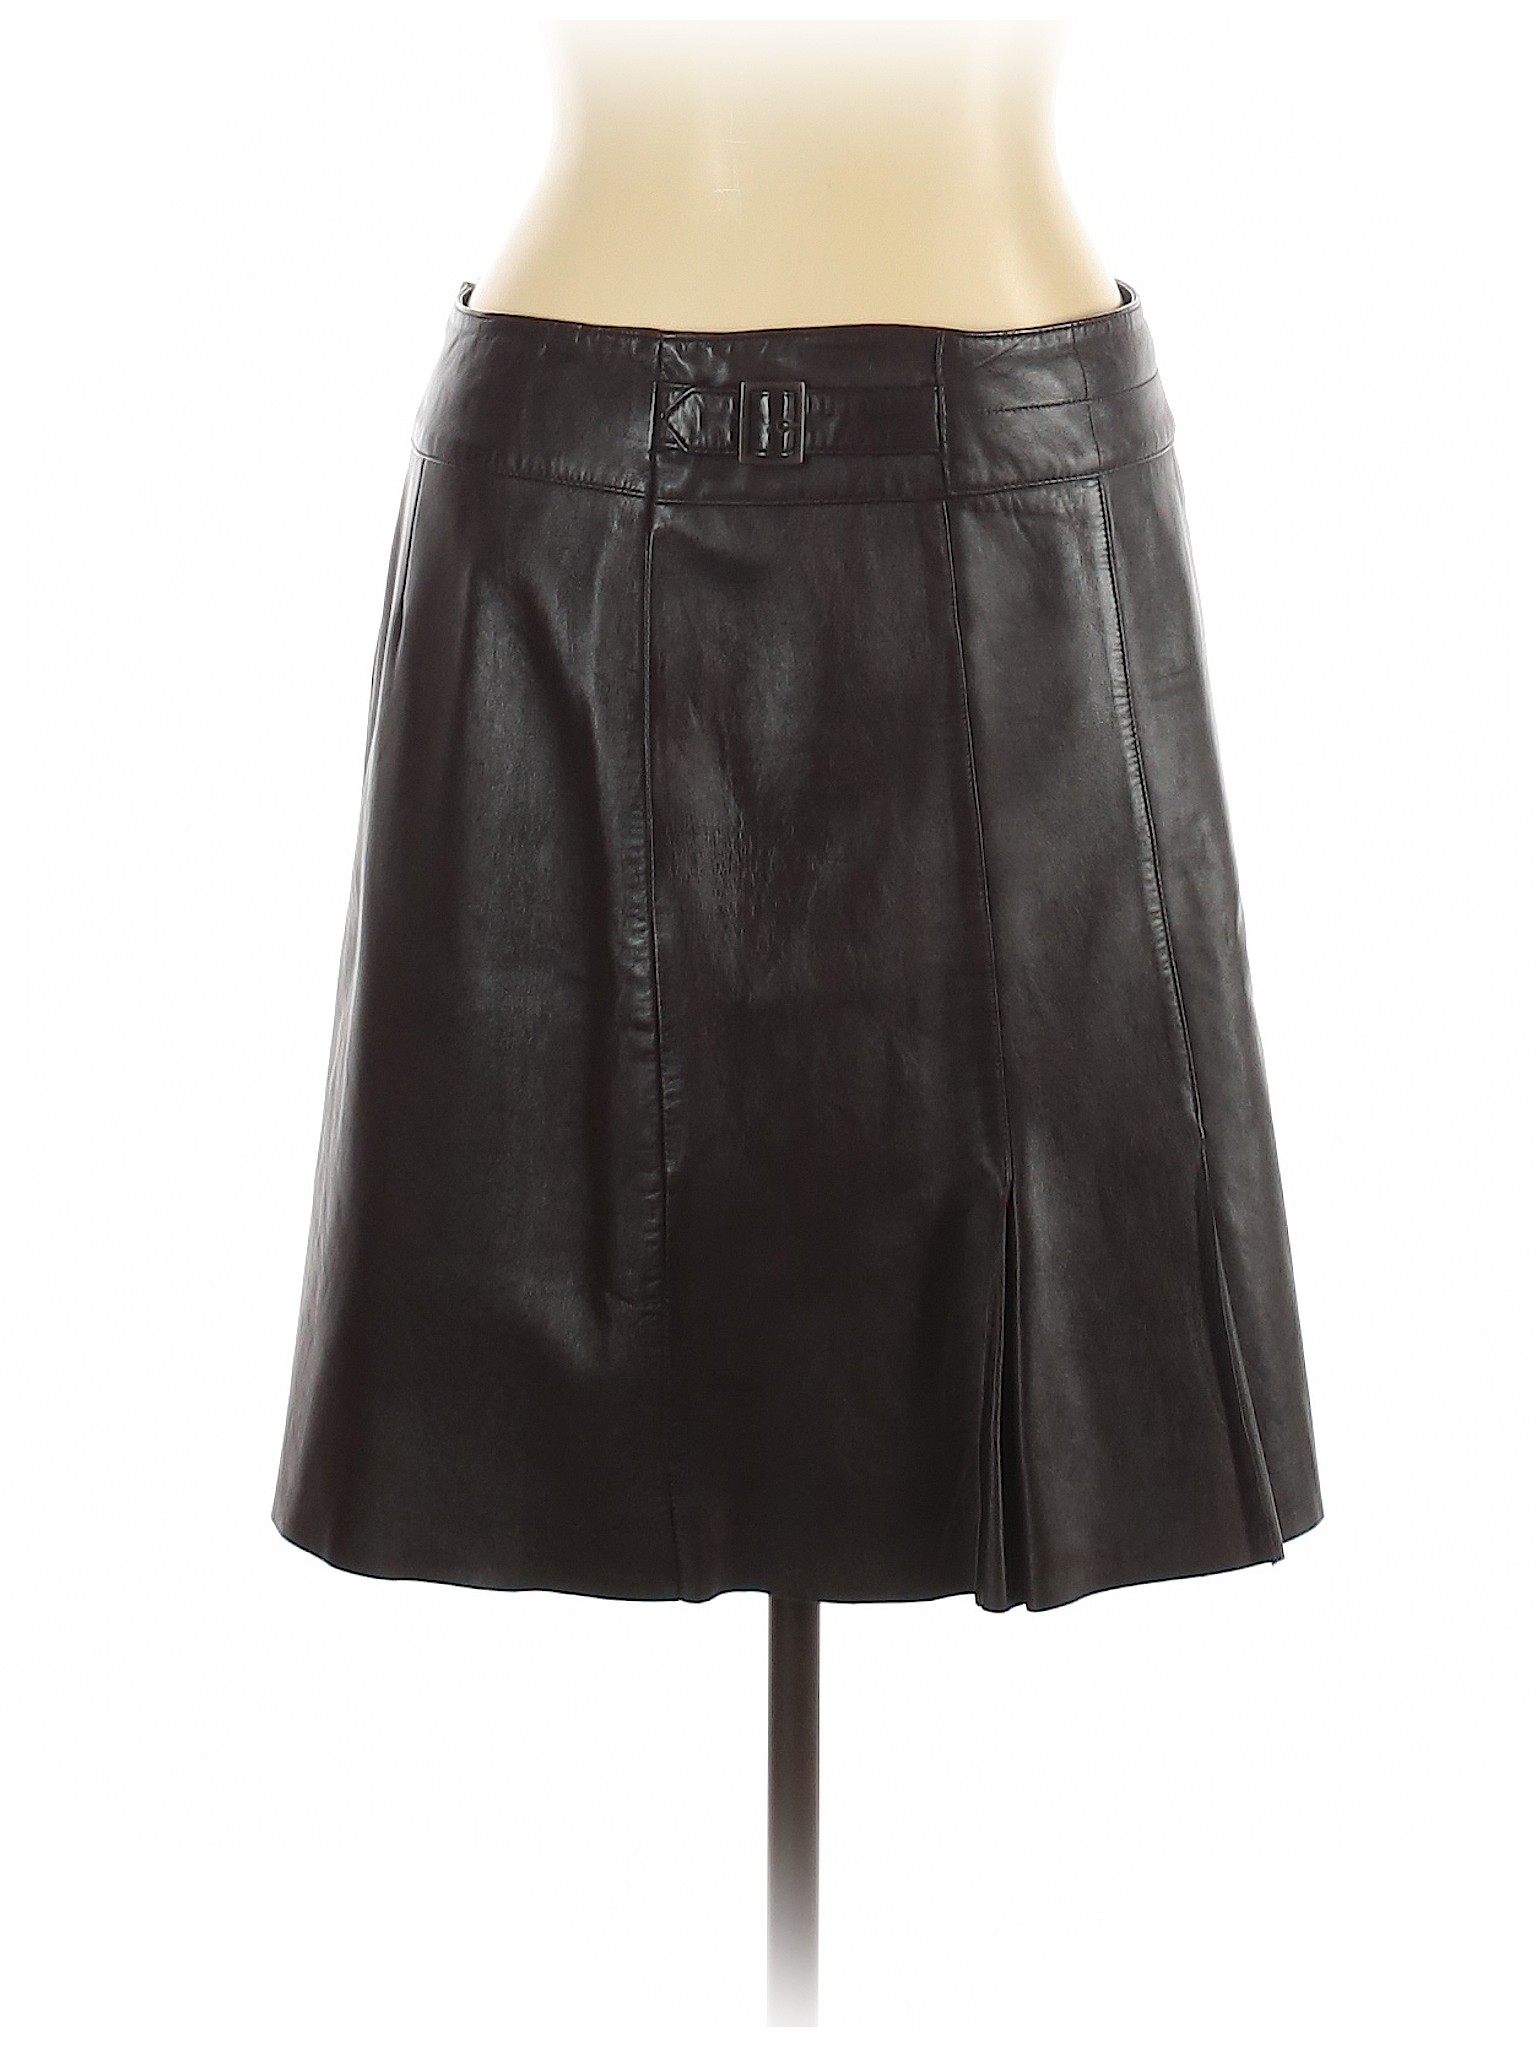 Cache 100% Leather Solid Black Brown Leather Skirt Size 10 - 75% off ...